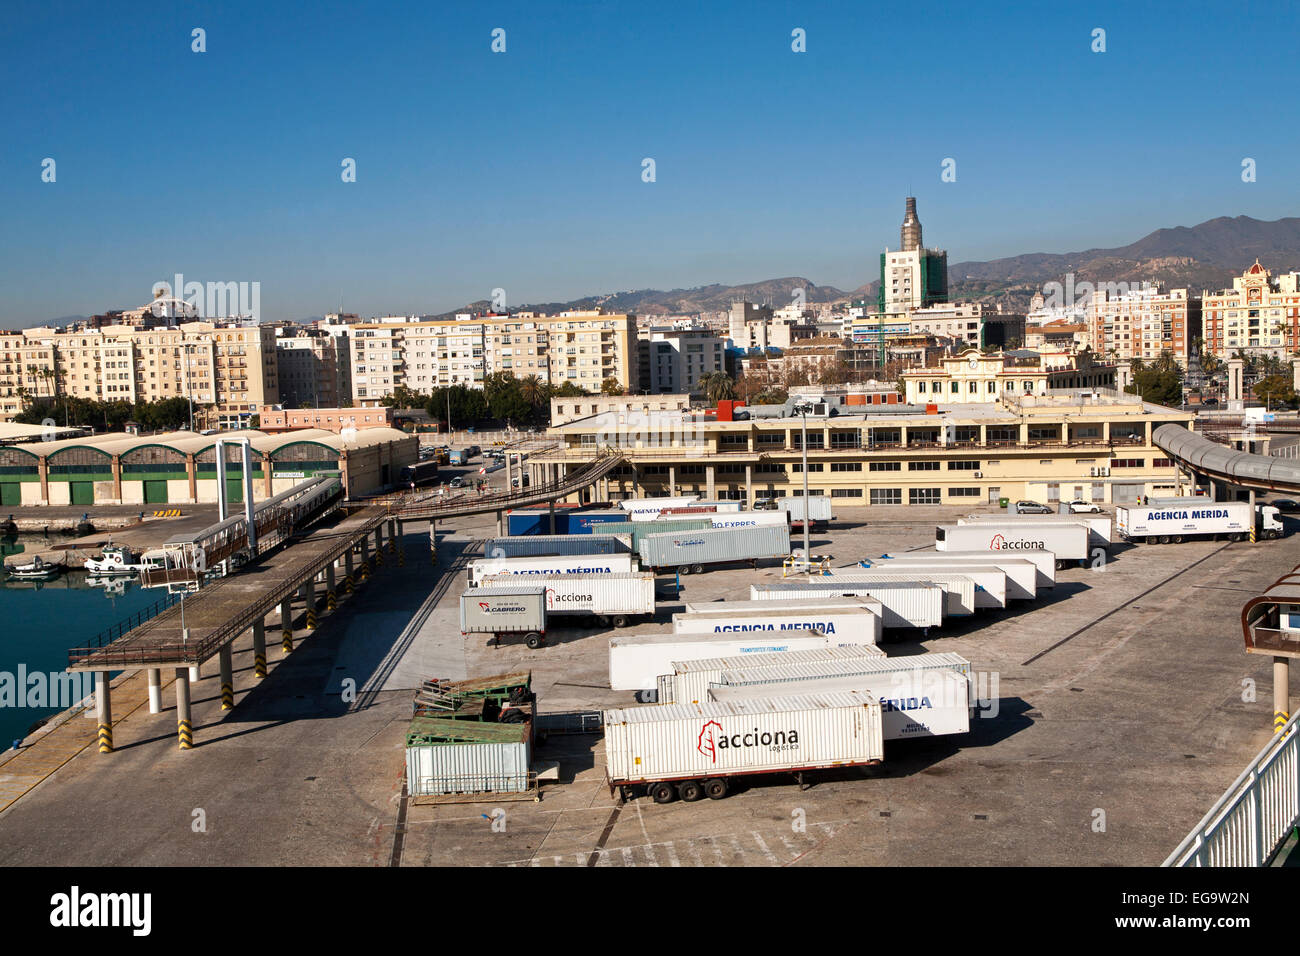 Vehicle containers on the quayside in the port of Malaga, Spain Stock Photo